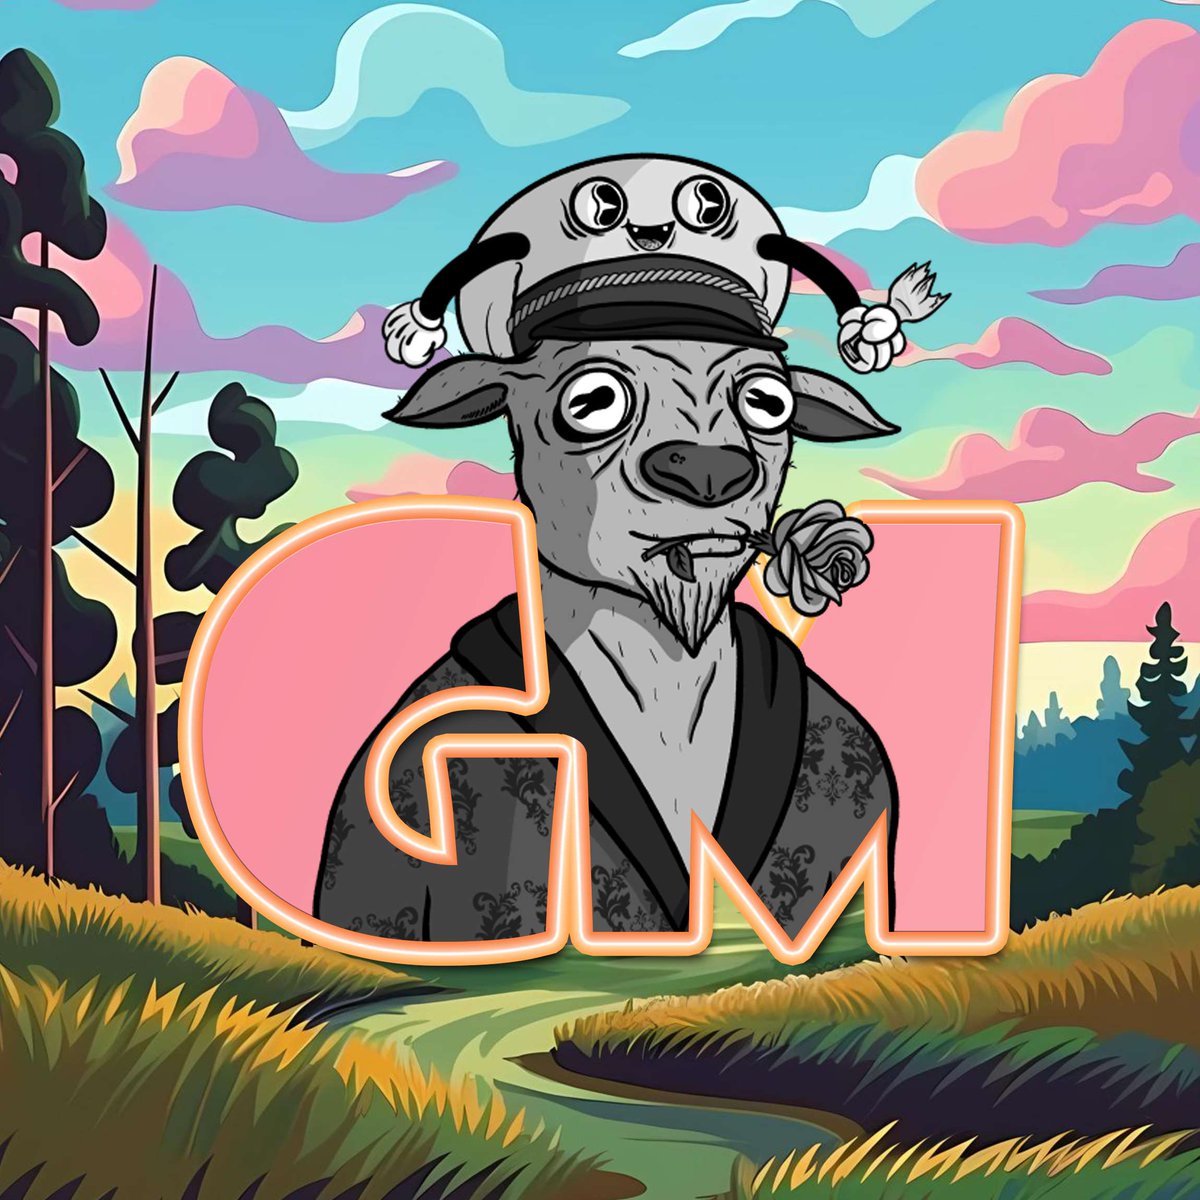 Gm Gm 🌹 Join the herd today! @DeluxeGoat